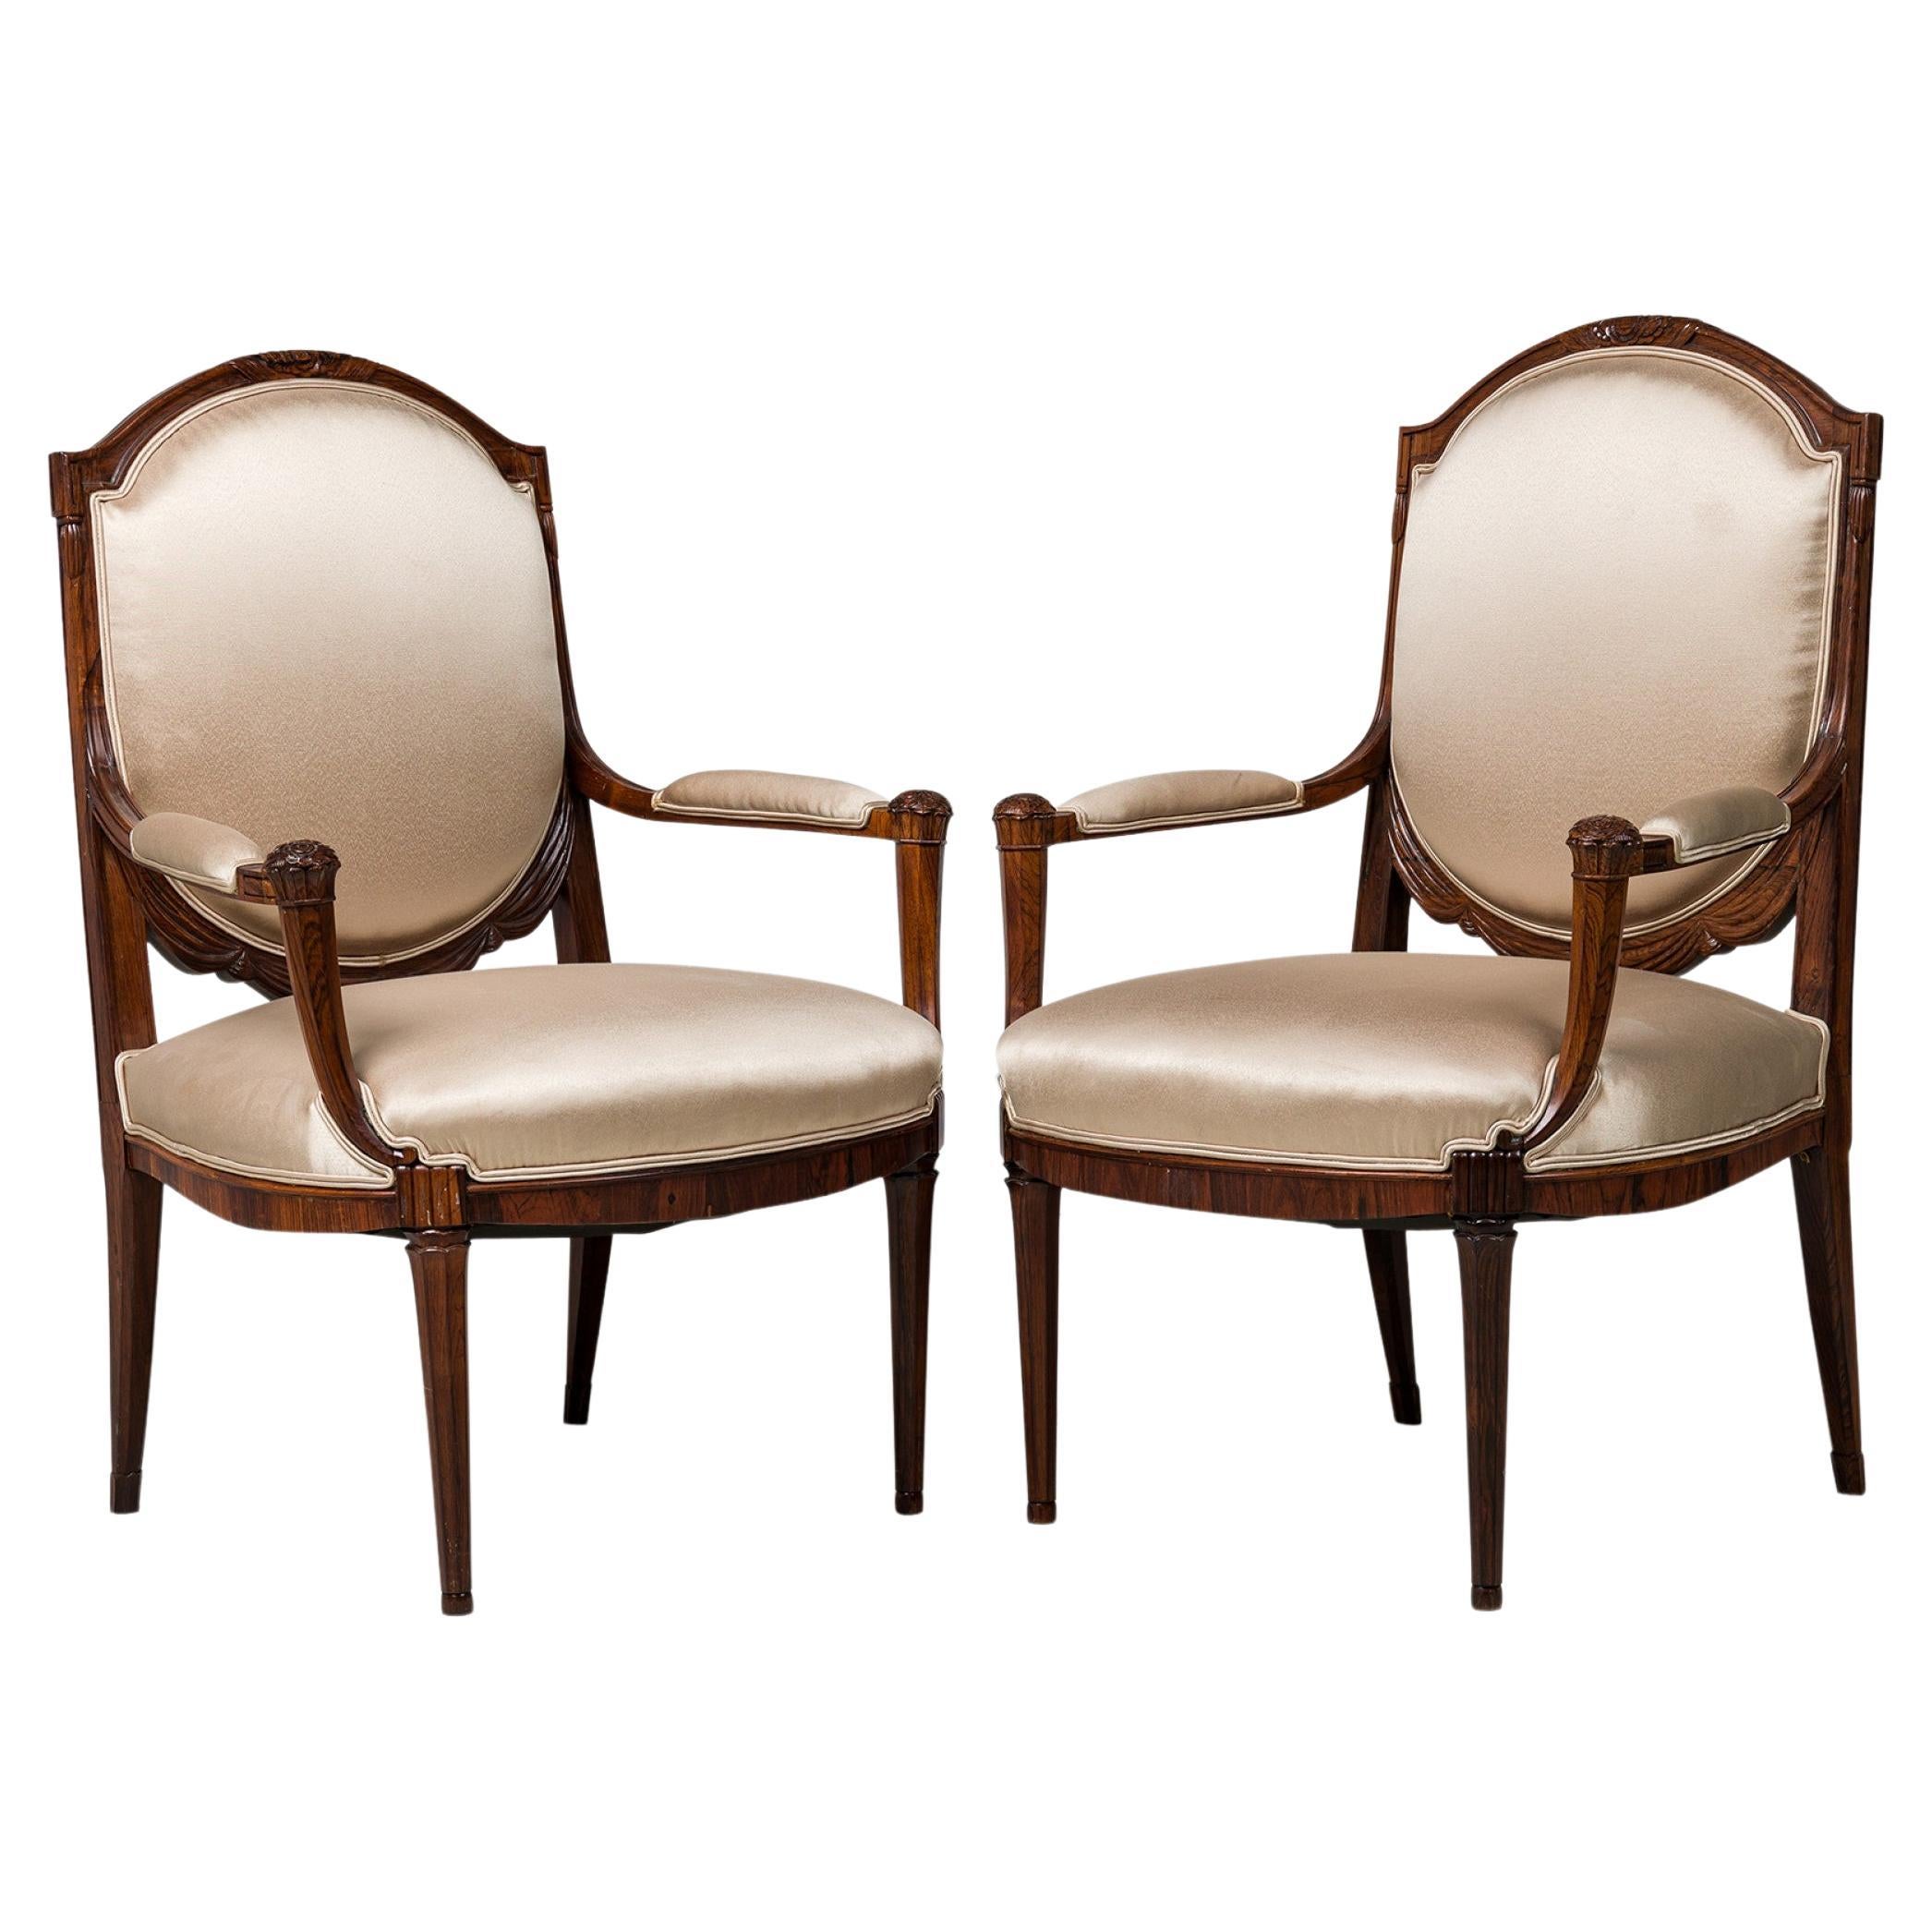 Pair of Late Art Deco French Mahogany Beige Sateen Upholstered Armchairs